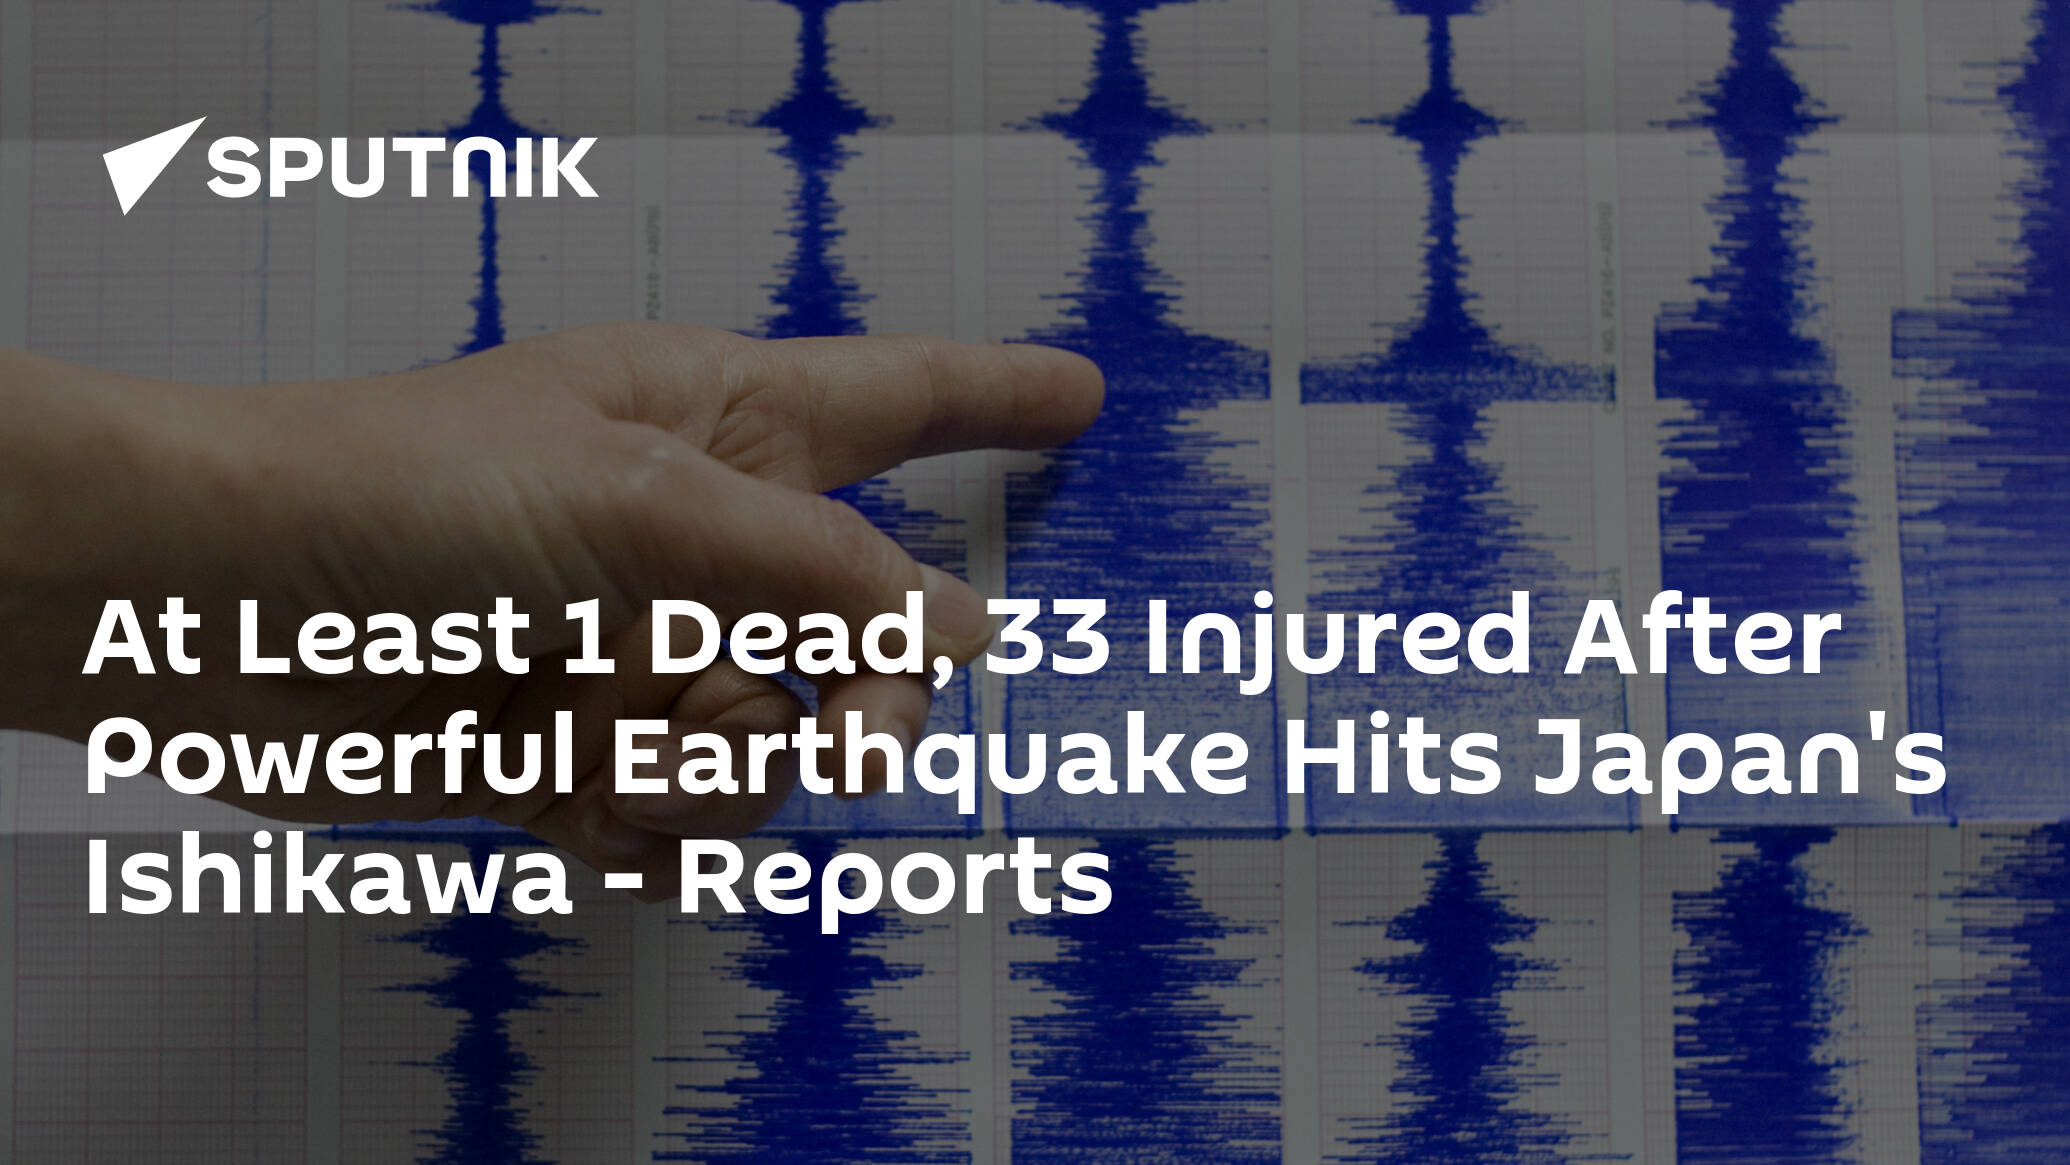 At Least 1 Dead, 33 Injured After Powerful Earthquake Hits Japan's Ishikawa – Reports